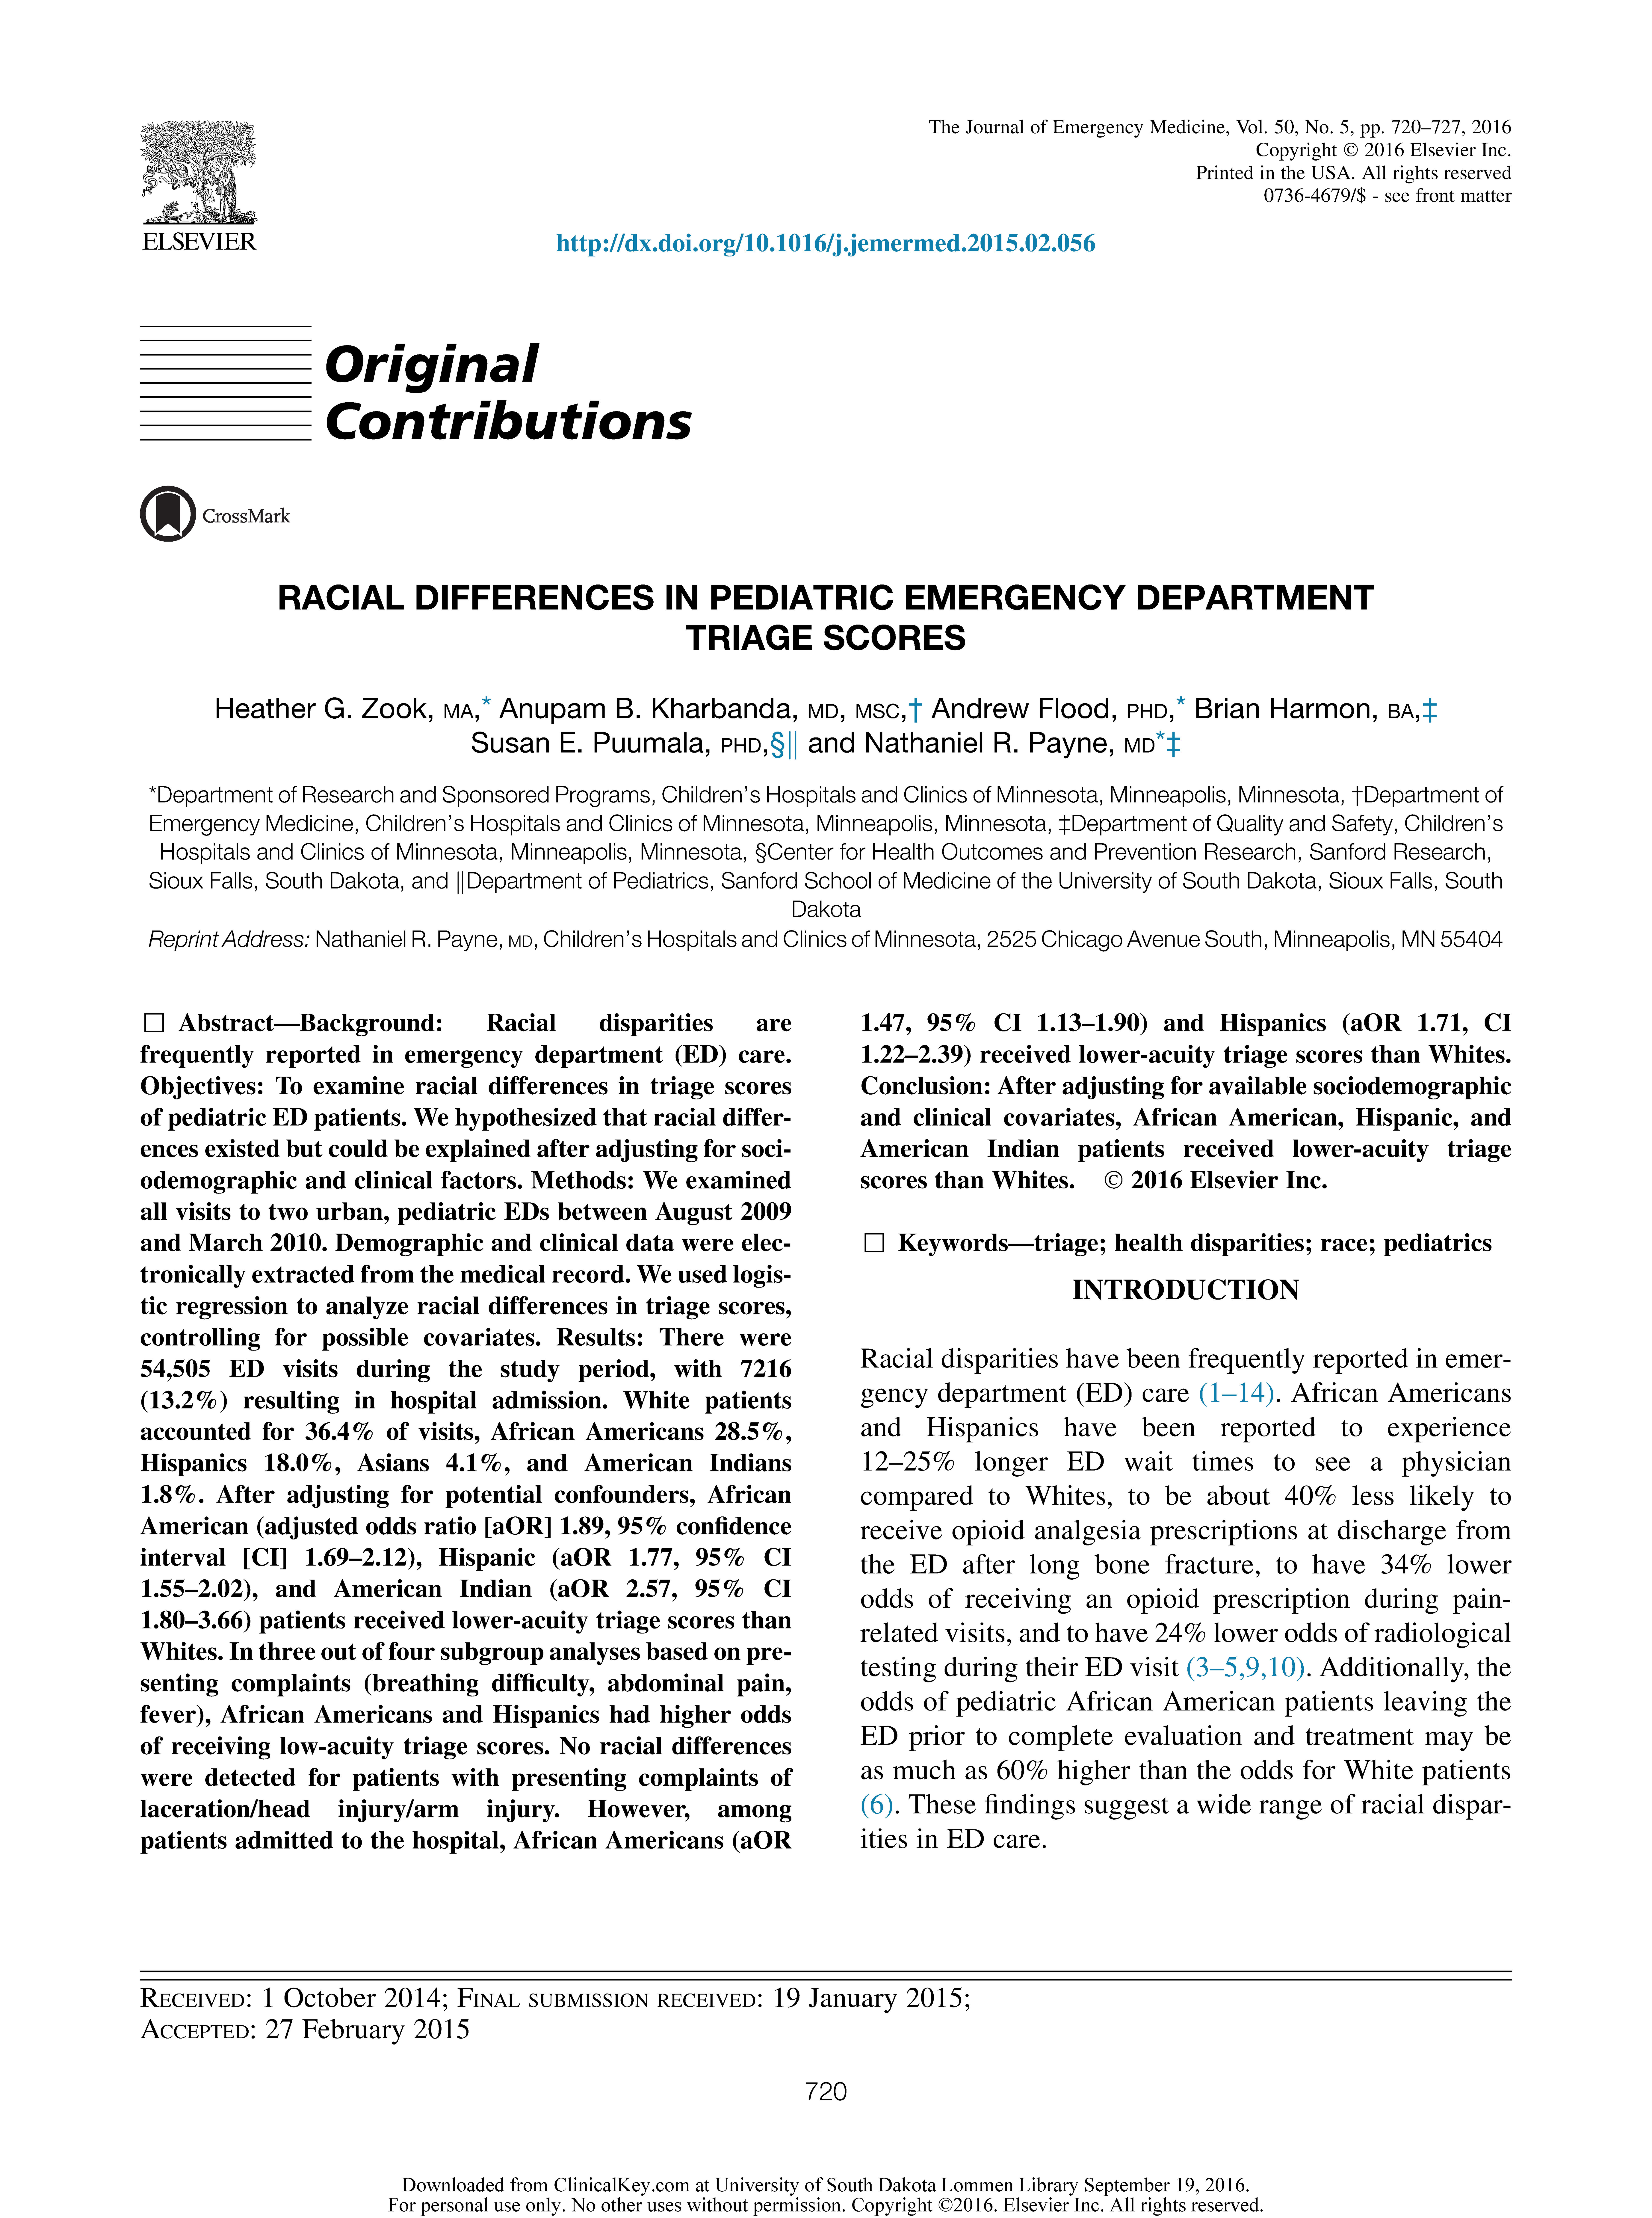 Pages from Zook Racial Differences in Pediatric Emergency Department Triage Scores